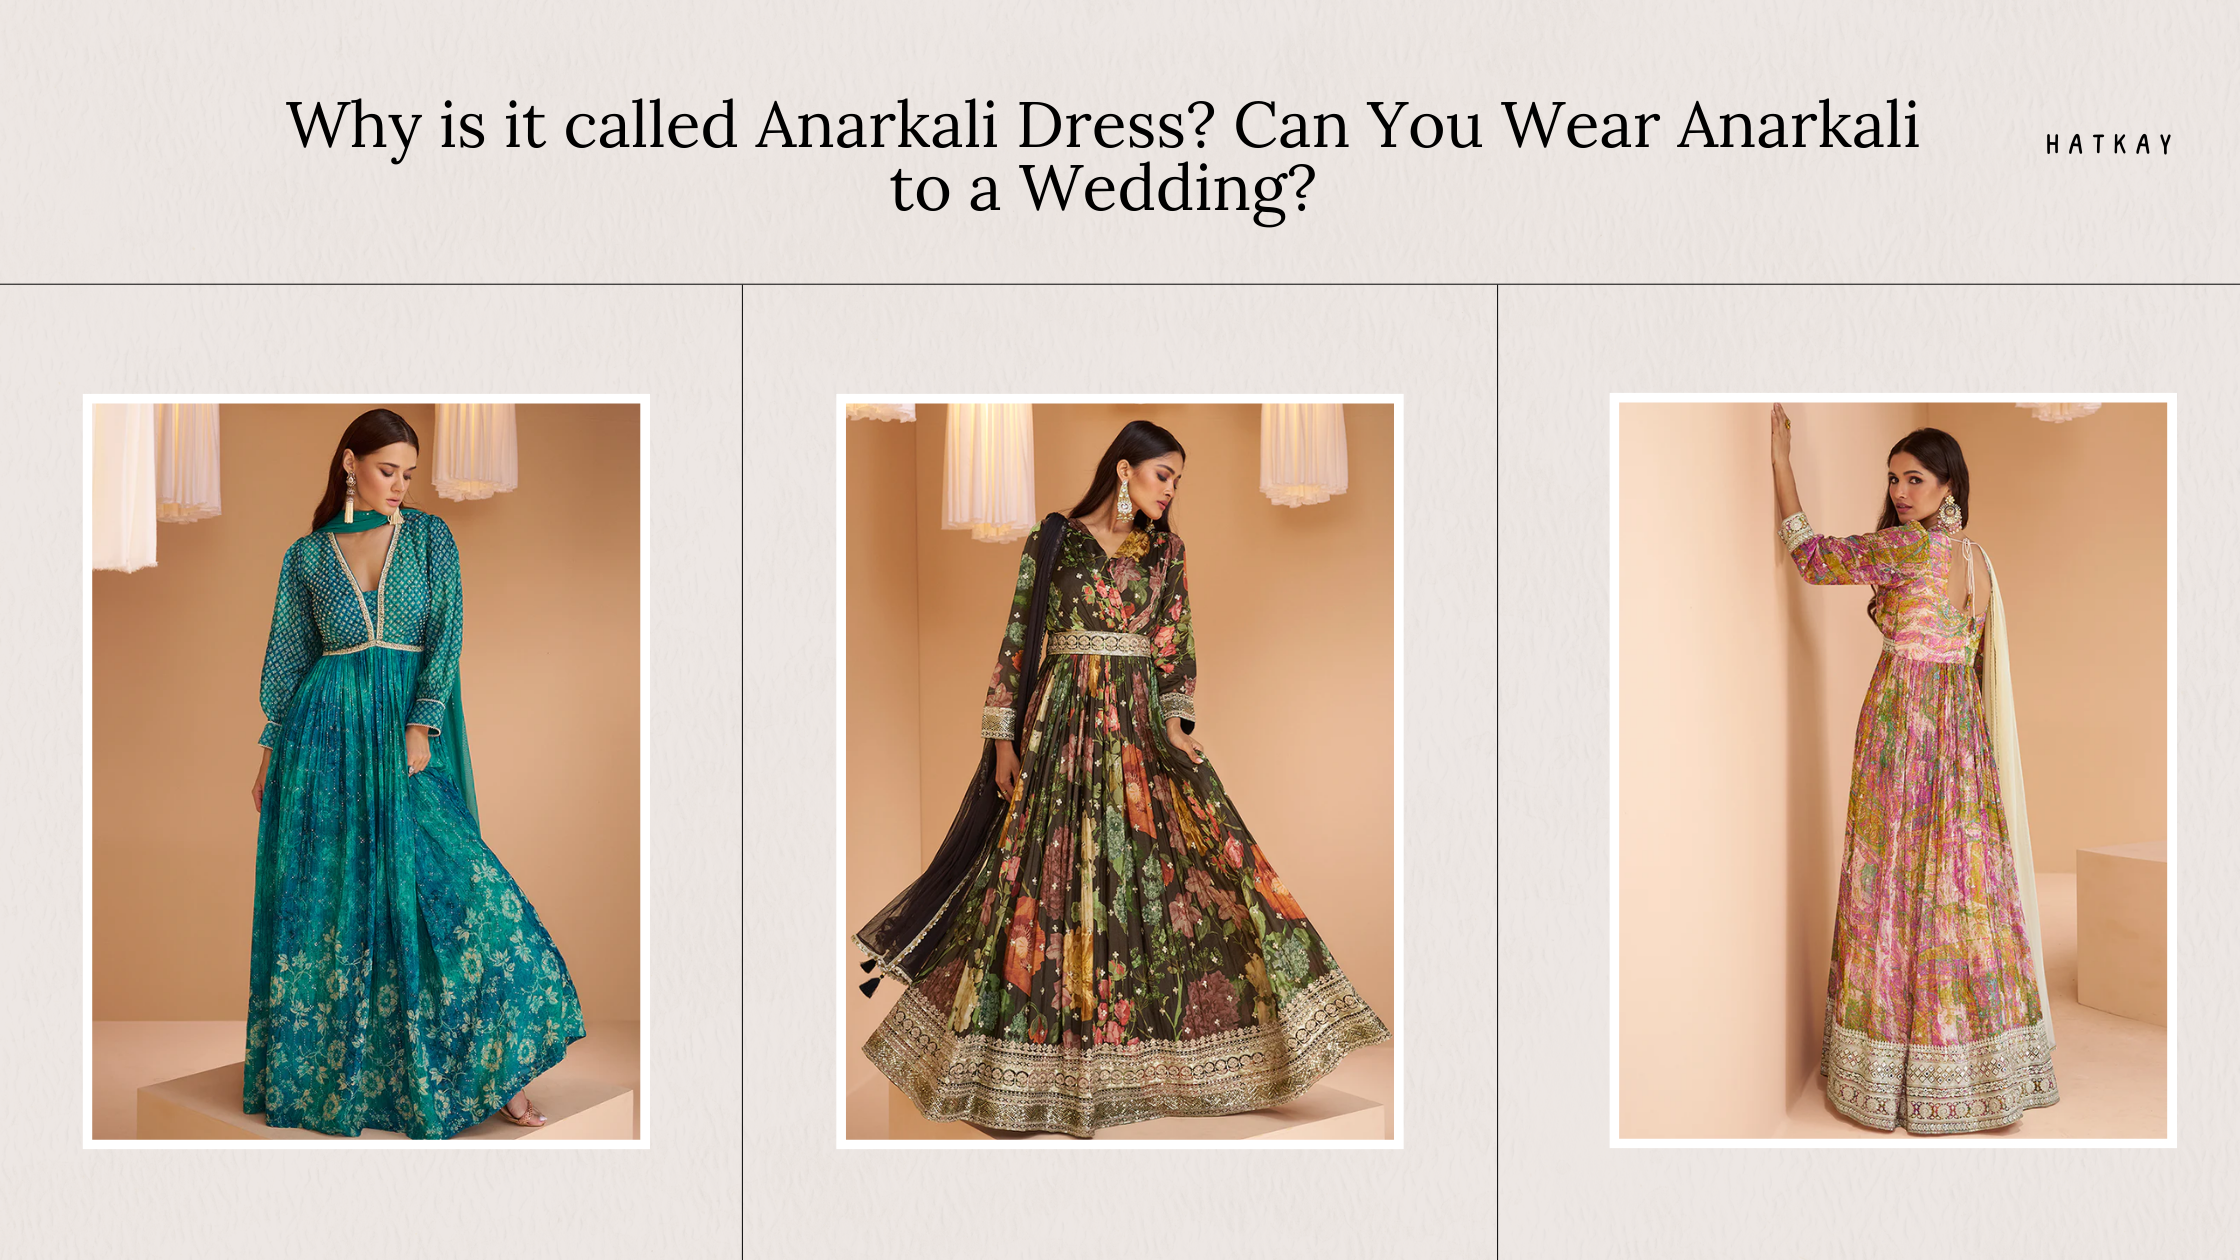 Why is it called Anarkali Dress? Can You Wear Anarkali to a Wedding?